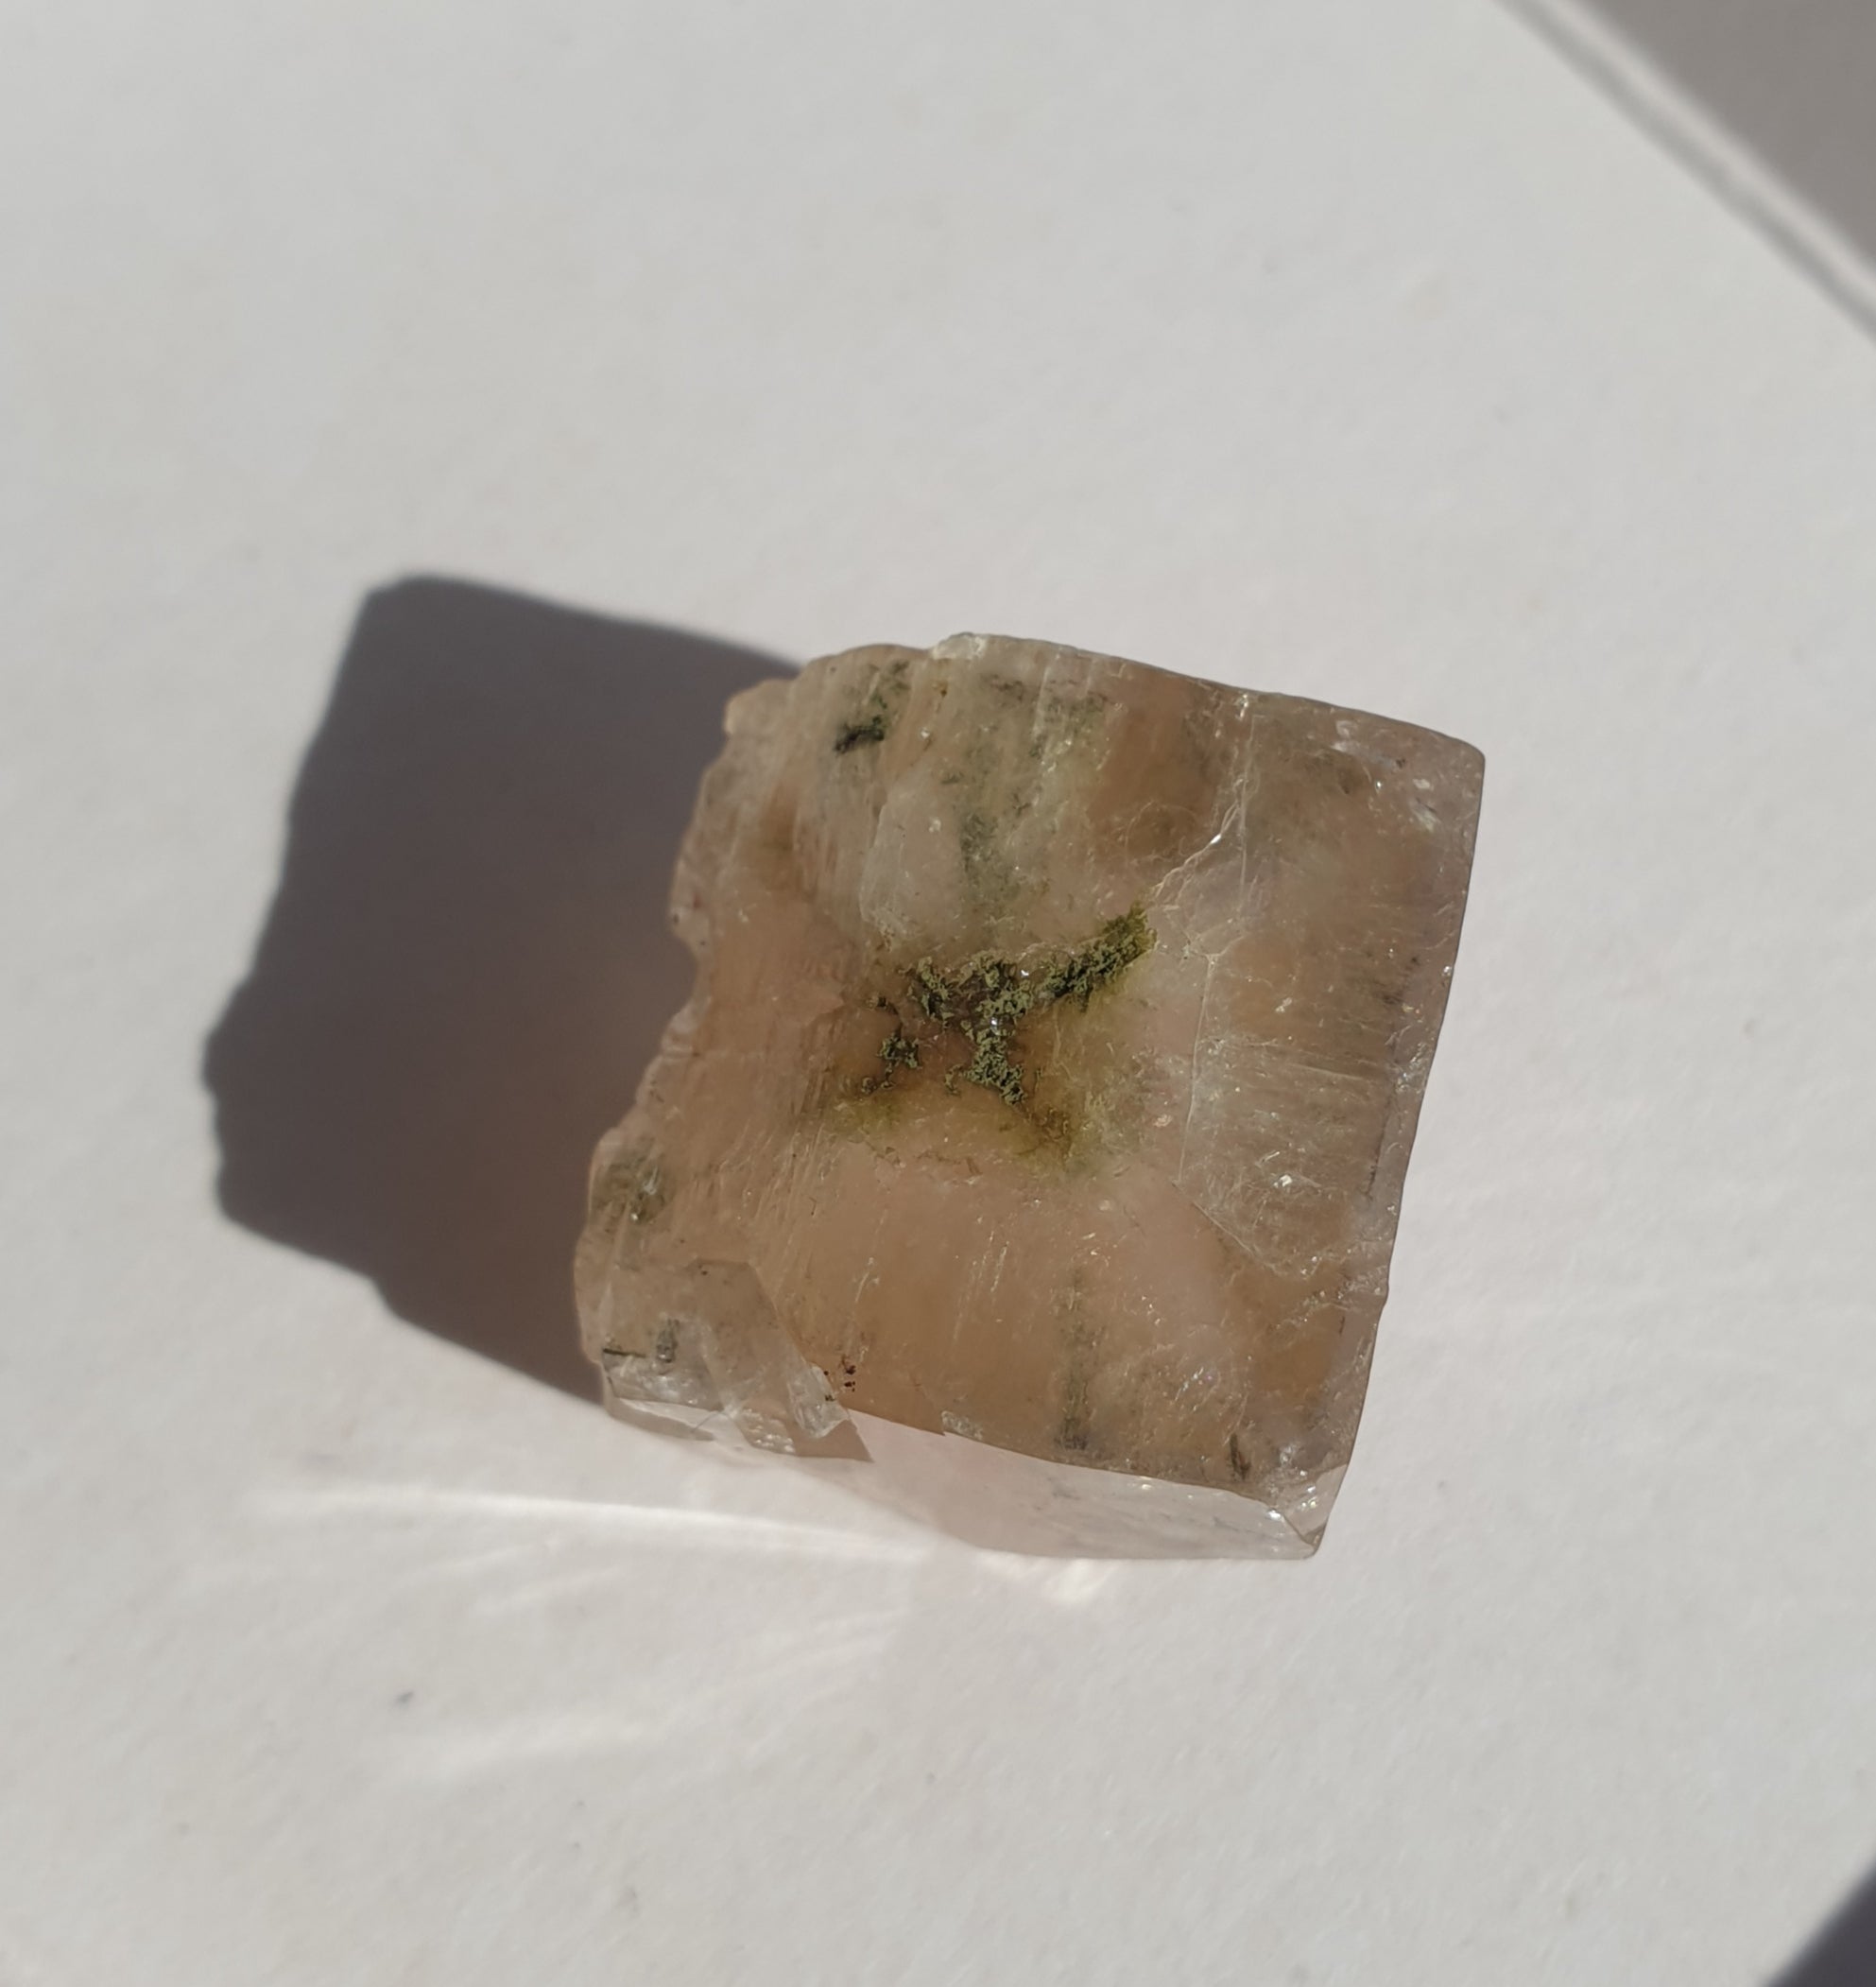 Apophyllite "cube" with unique moss inclusions & pink center